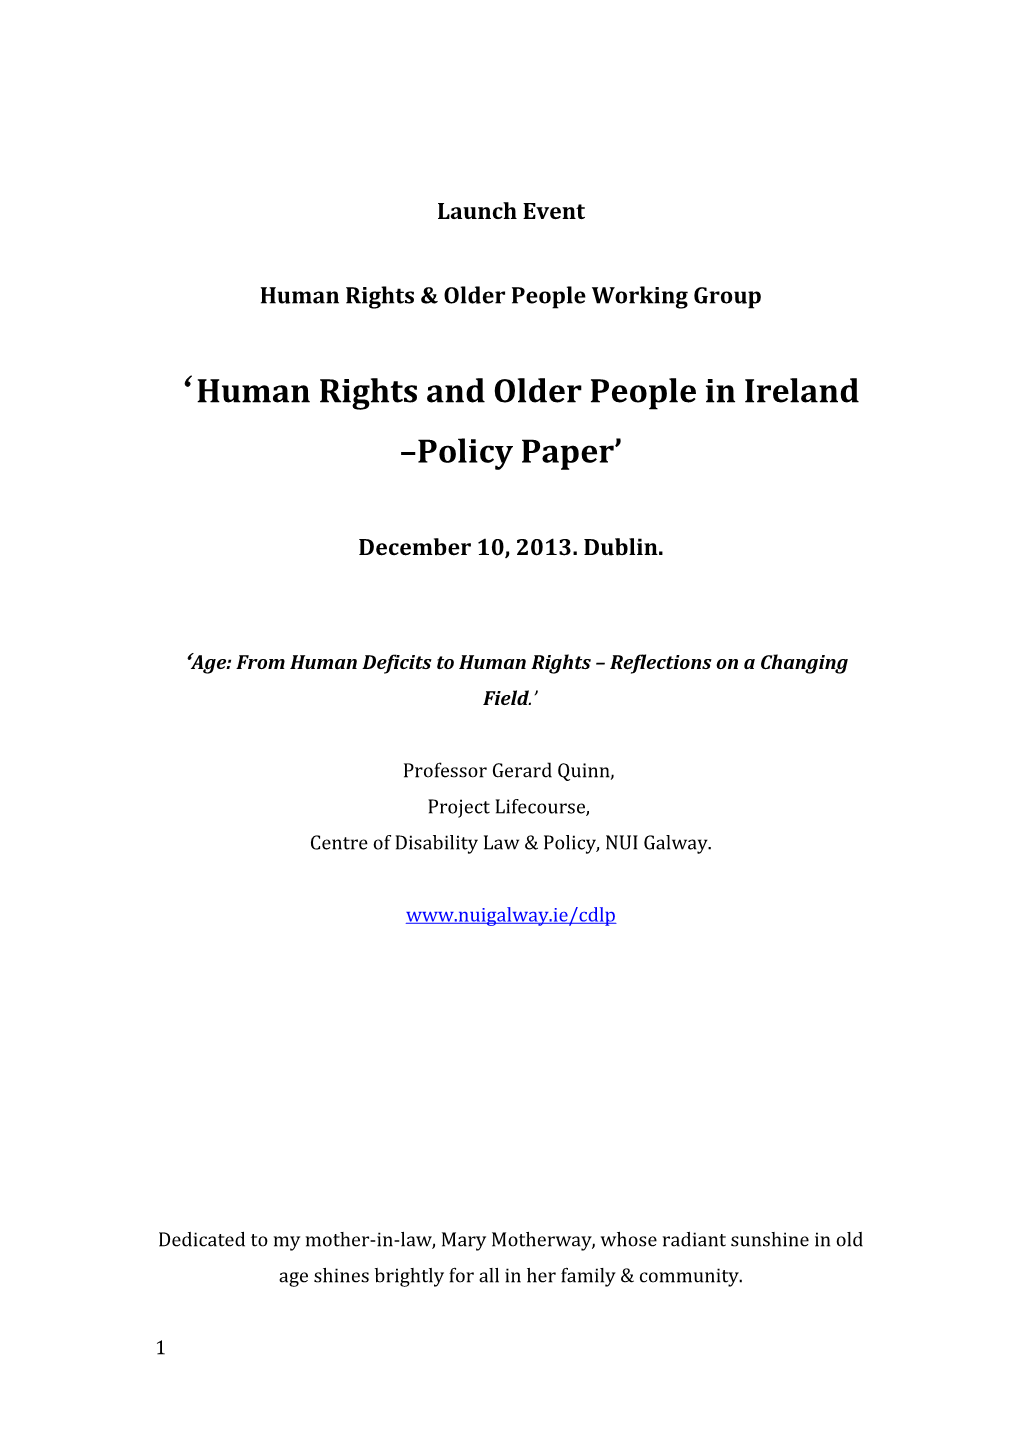 Human Rights & Older People Working Group